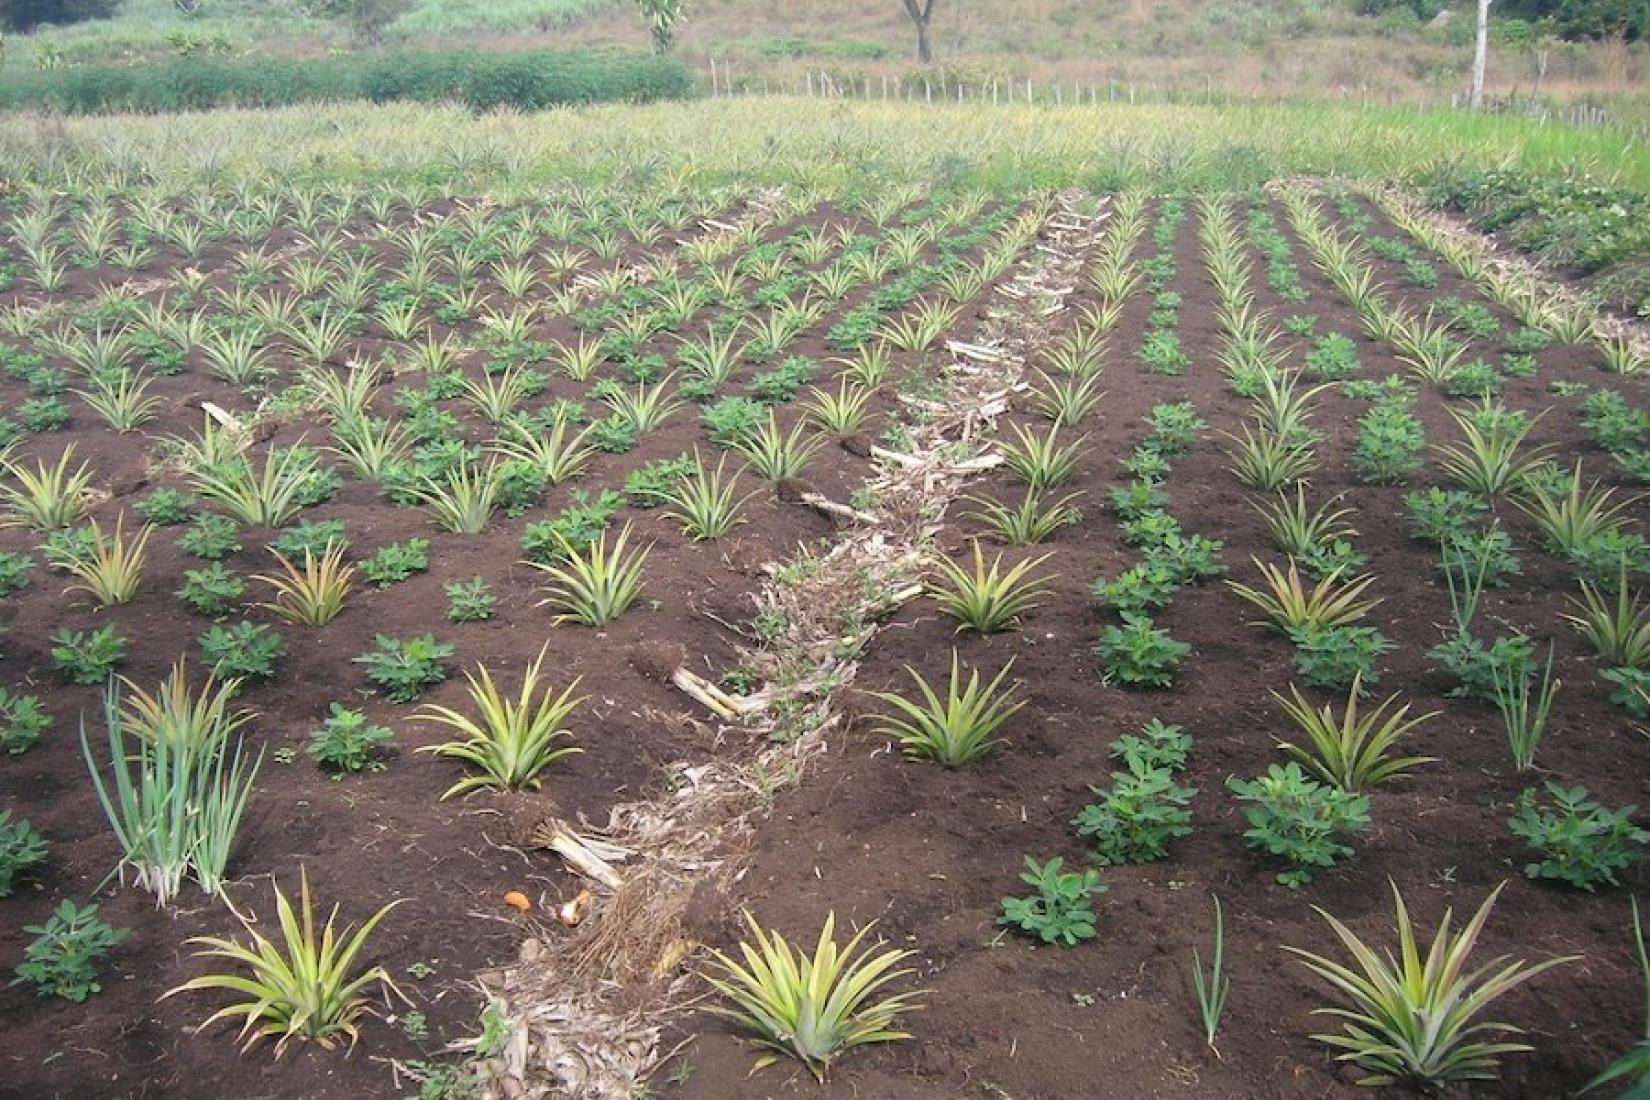 Pineapple planting intercropped with peanut and spring onion. Photograph: Mike Webb